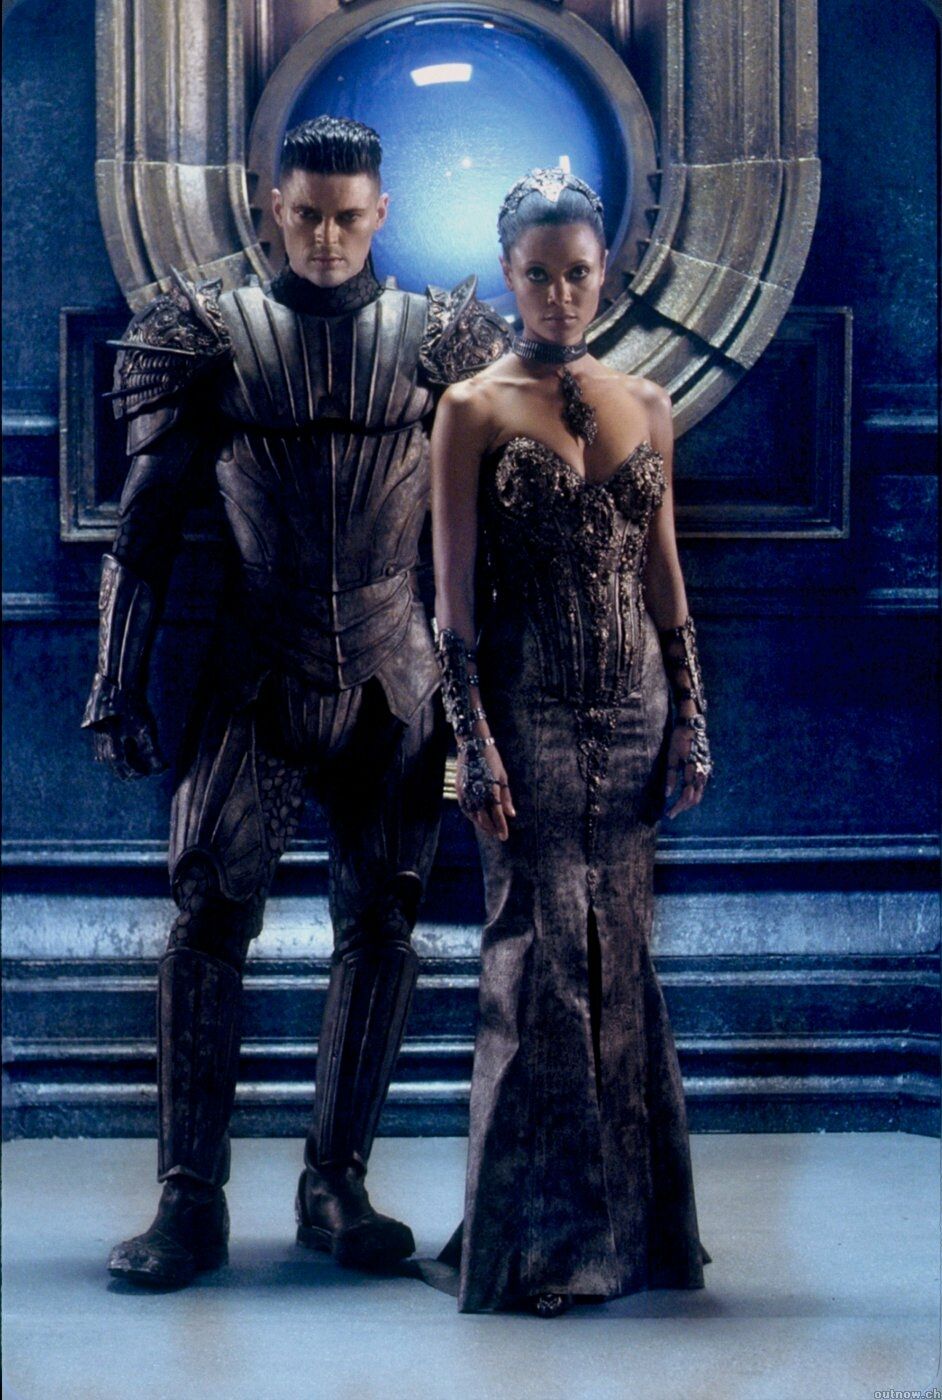 The Chronicles of Riddick. Karl urban, The chronicles of riddick, Movie costumes